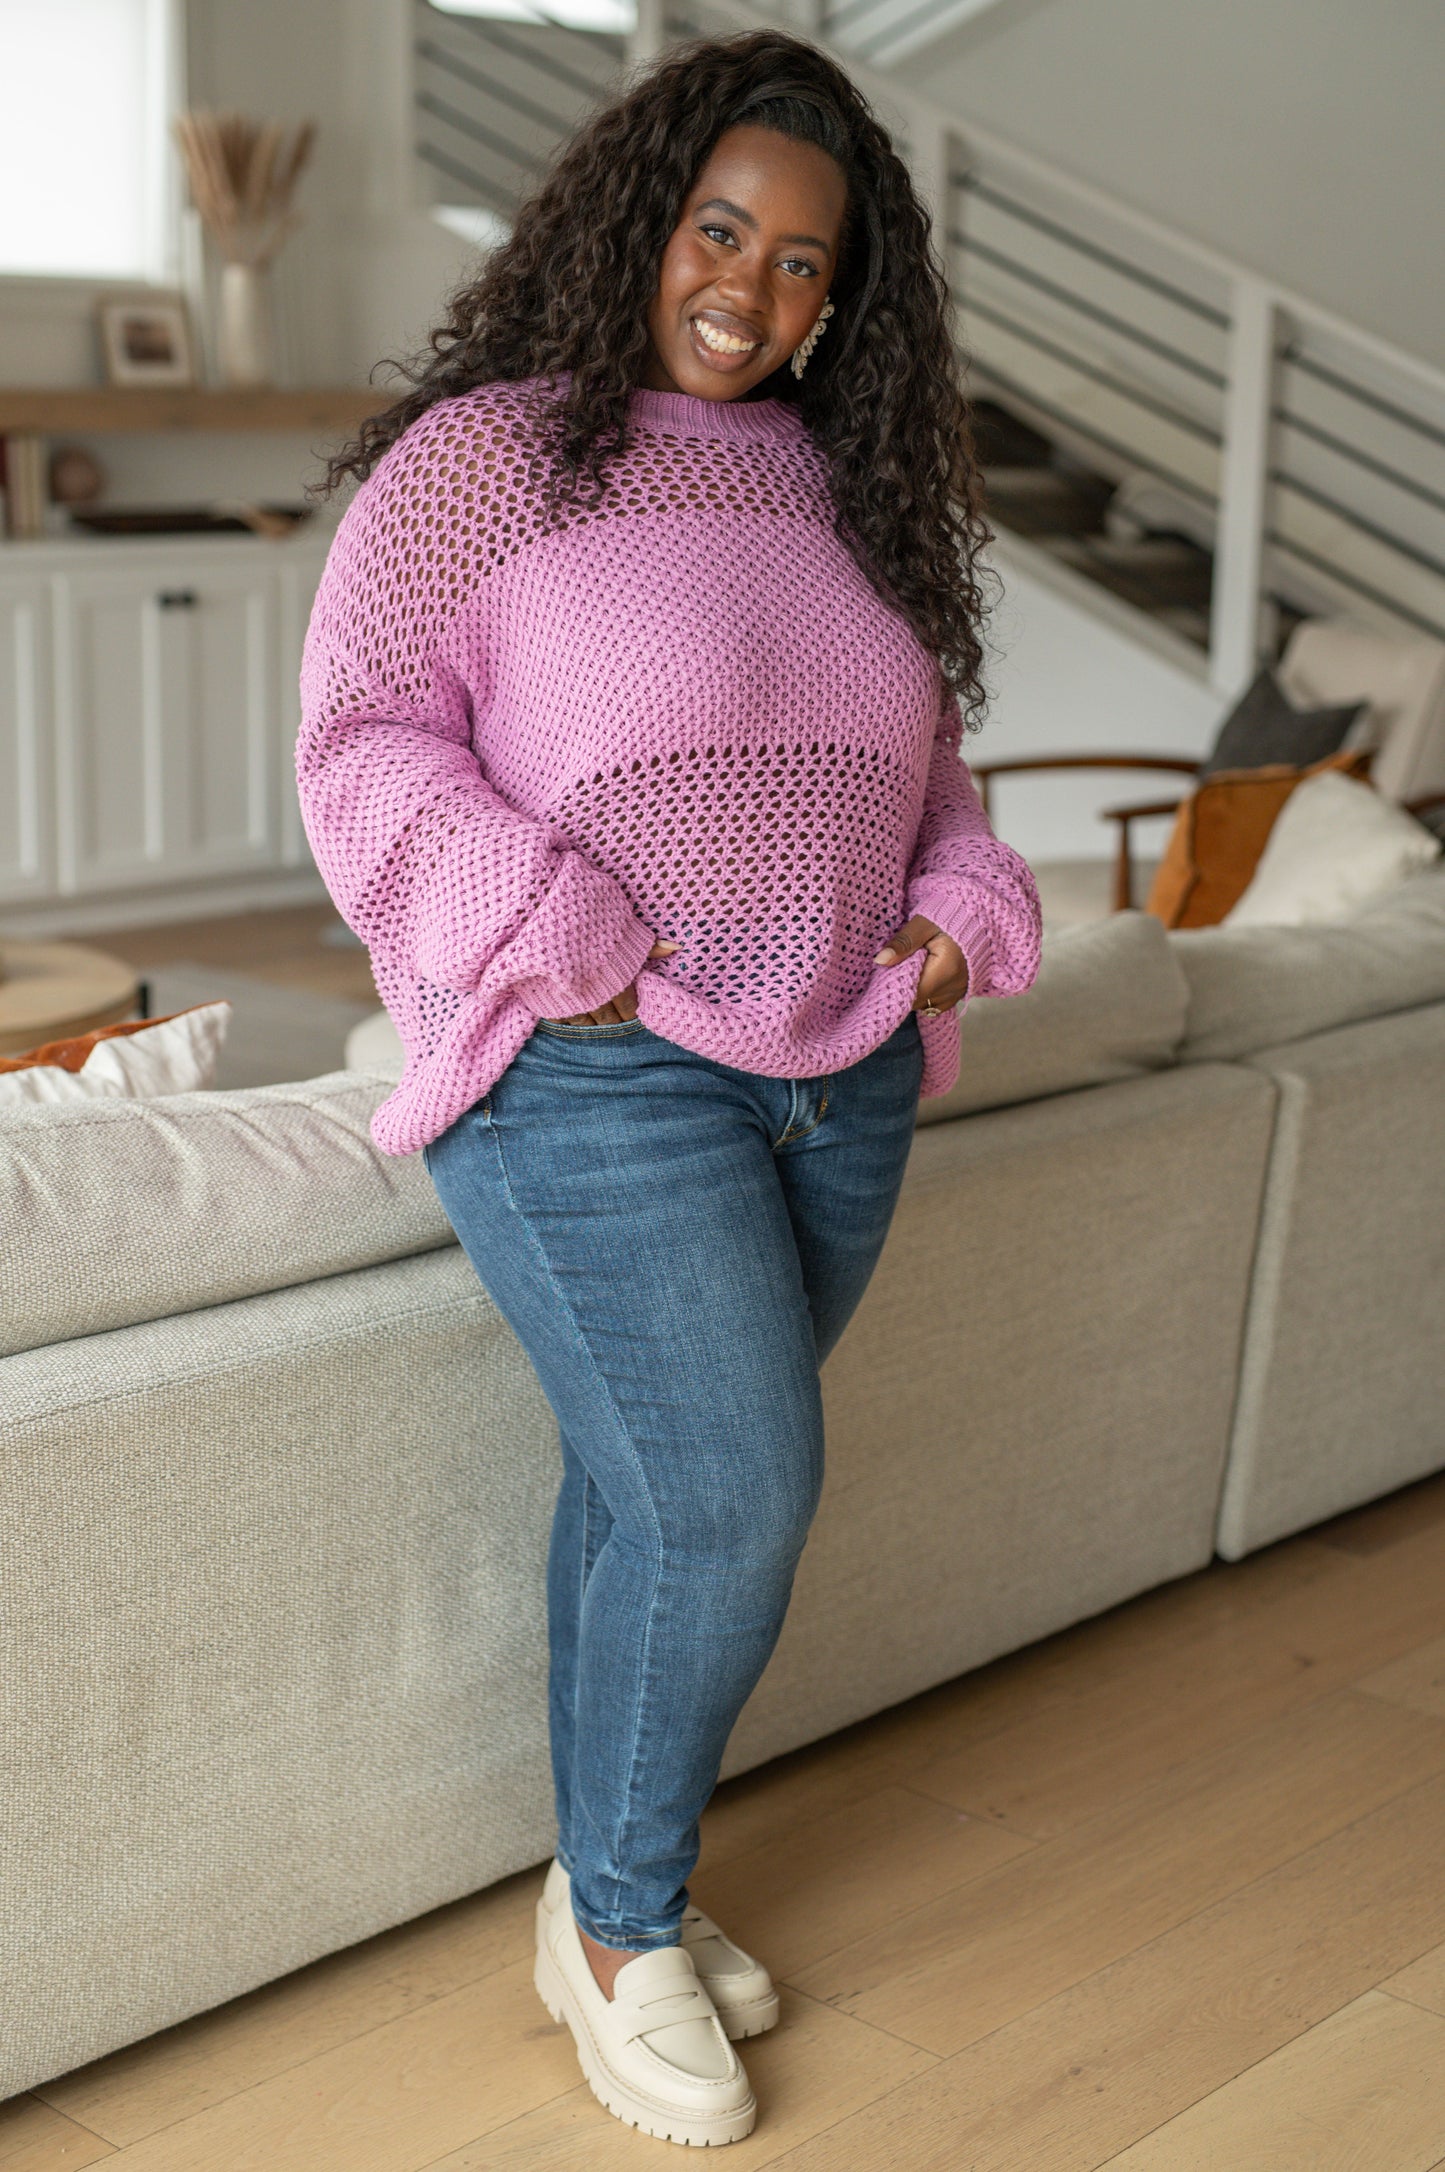 My Latest Love Loose Knit Sweater - Three Bears Boutique